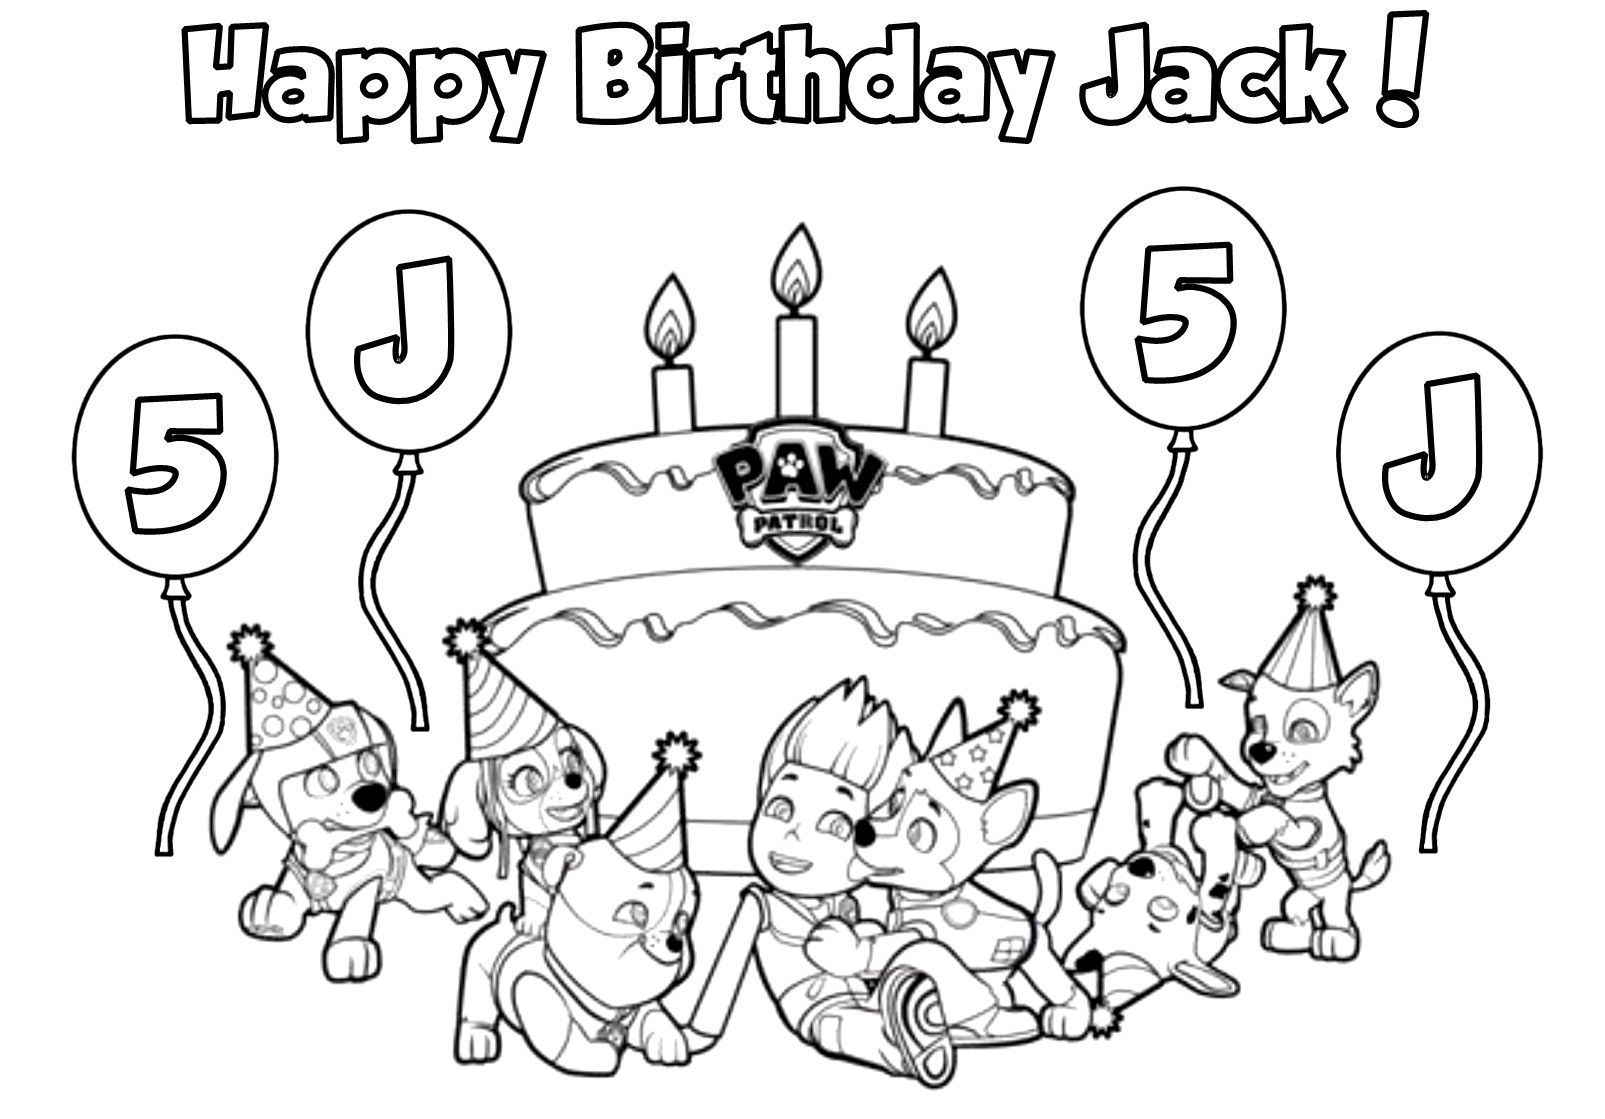 paw-patrol-birthday-coloring-page-clip-art-library